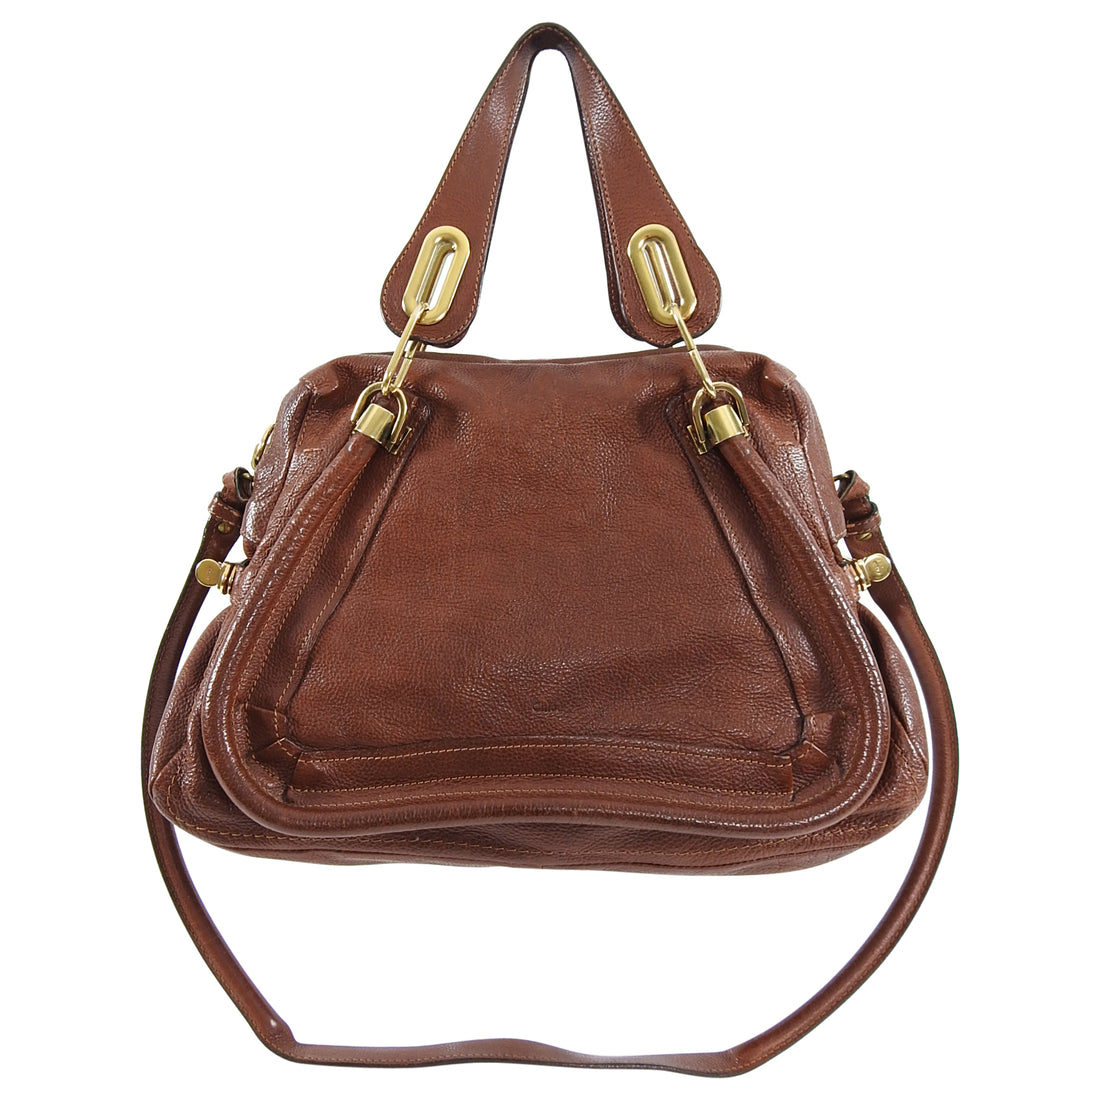 Chloe Cognac Brown Leather Paraty Convertible Bag – I MISS YOU VINTAGE